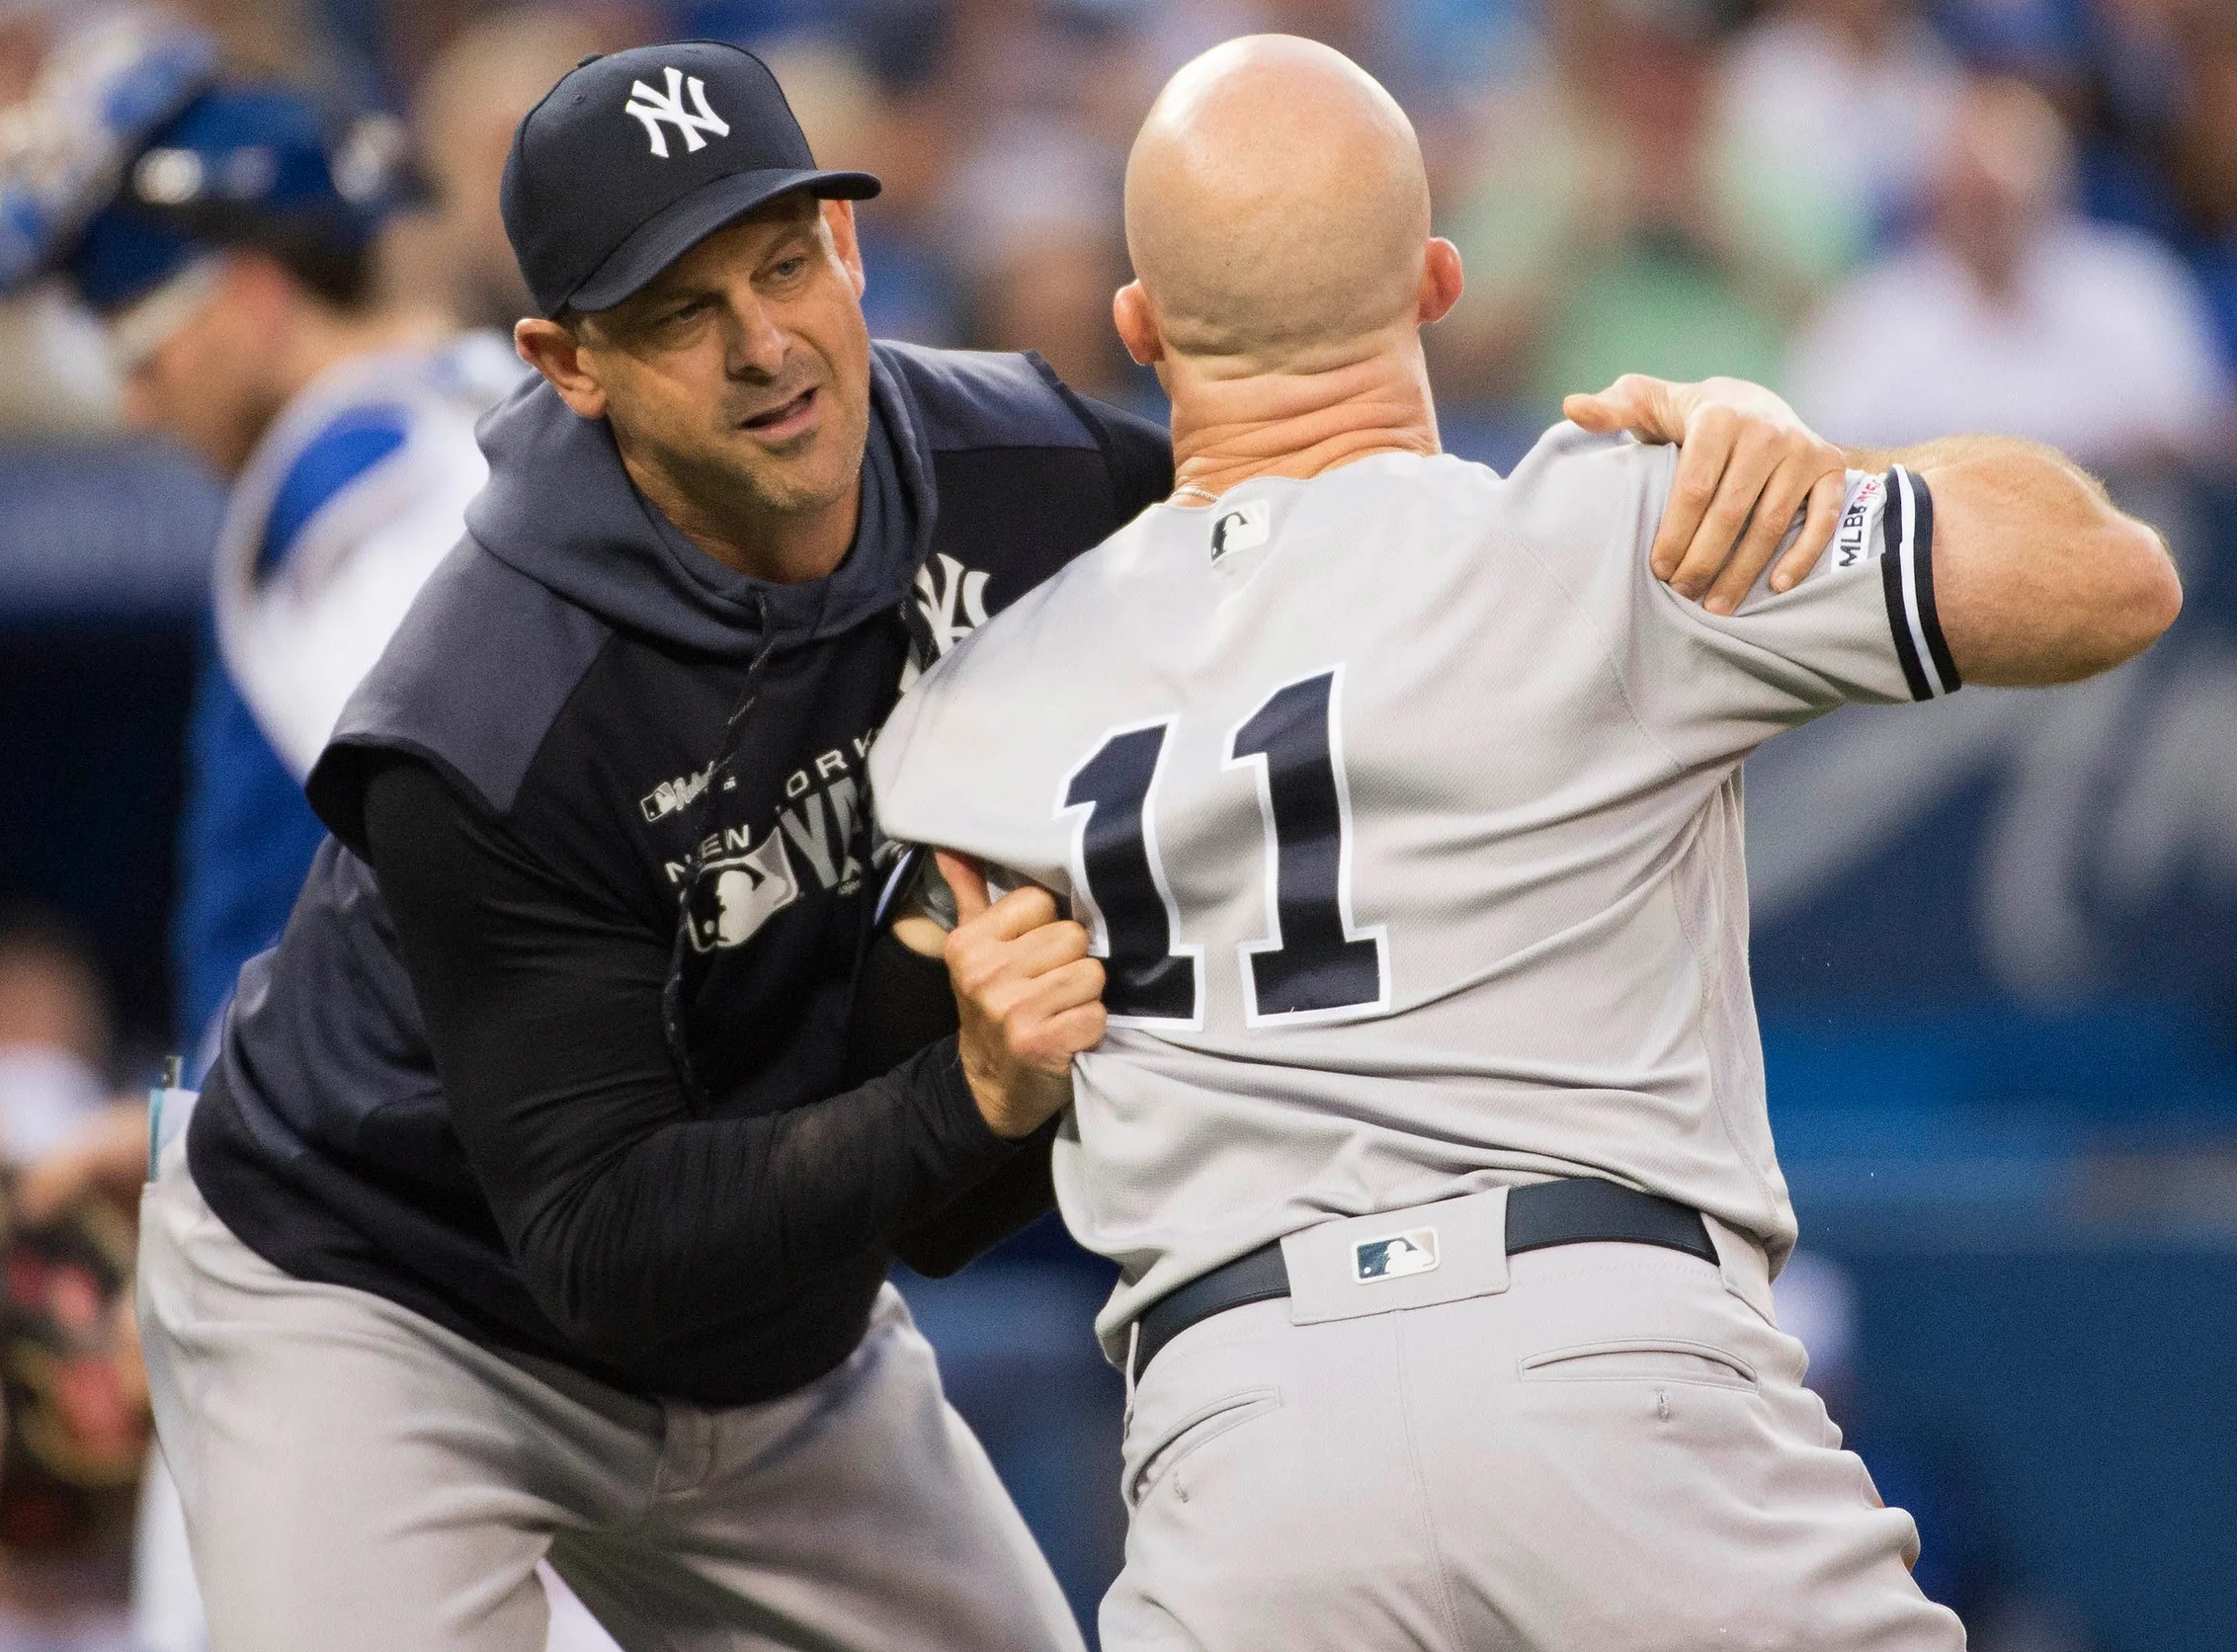 Yankees manager Brian Cashman stops Brett Gardner, who is charging toward the umpire, at